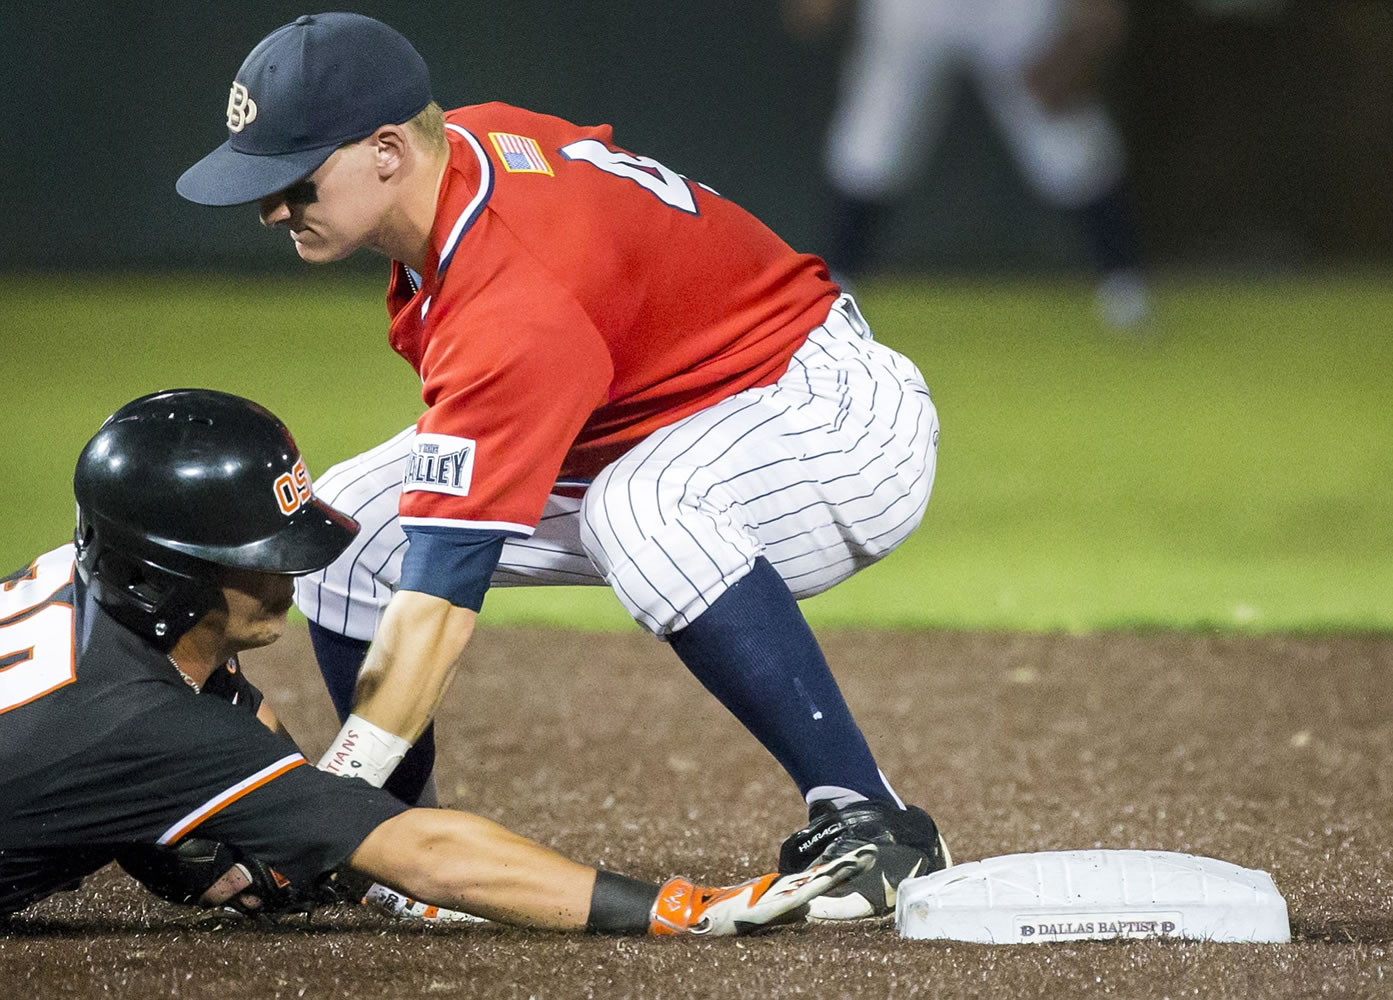 Dallas Baptist shortstop Camden Duzenack tags out Oregon State's Michael Howard at second base Sunday.